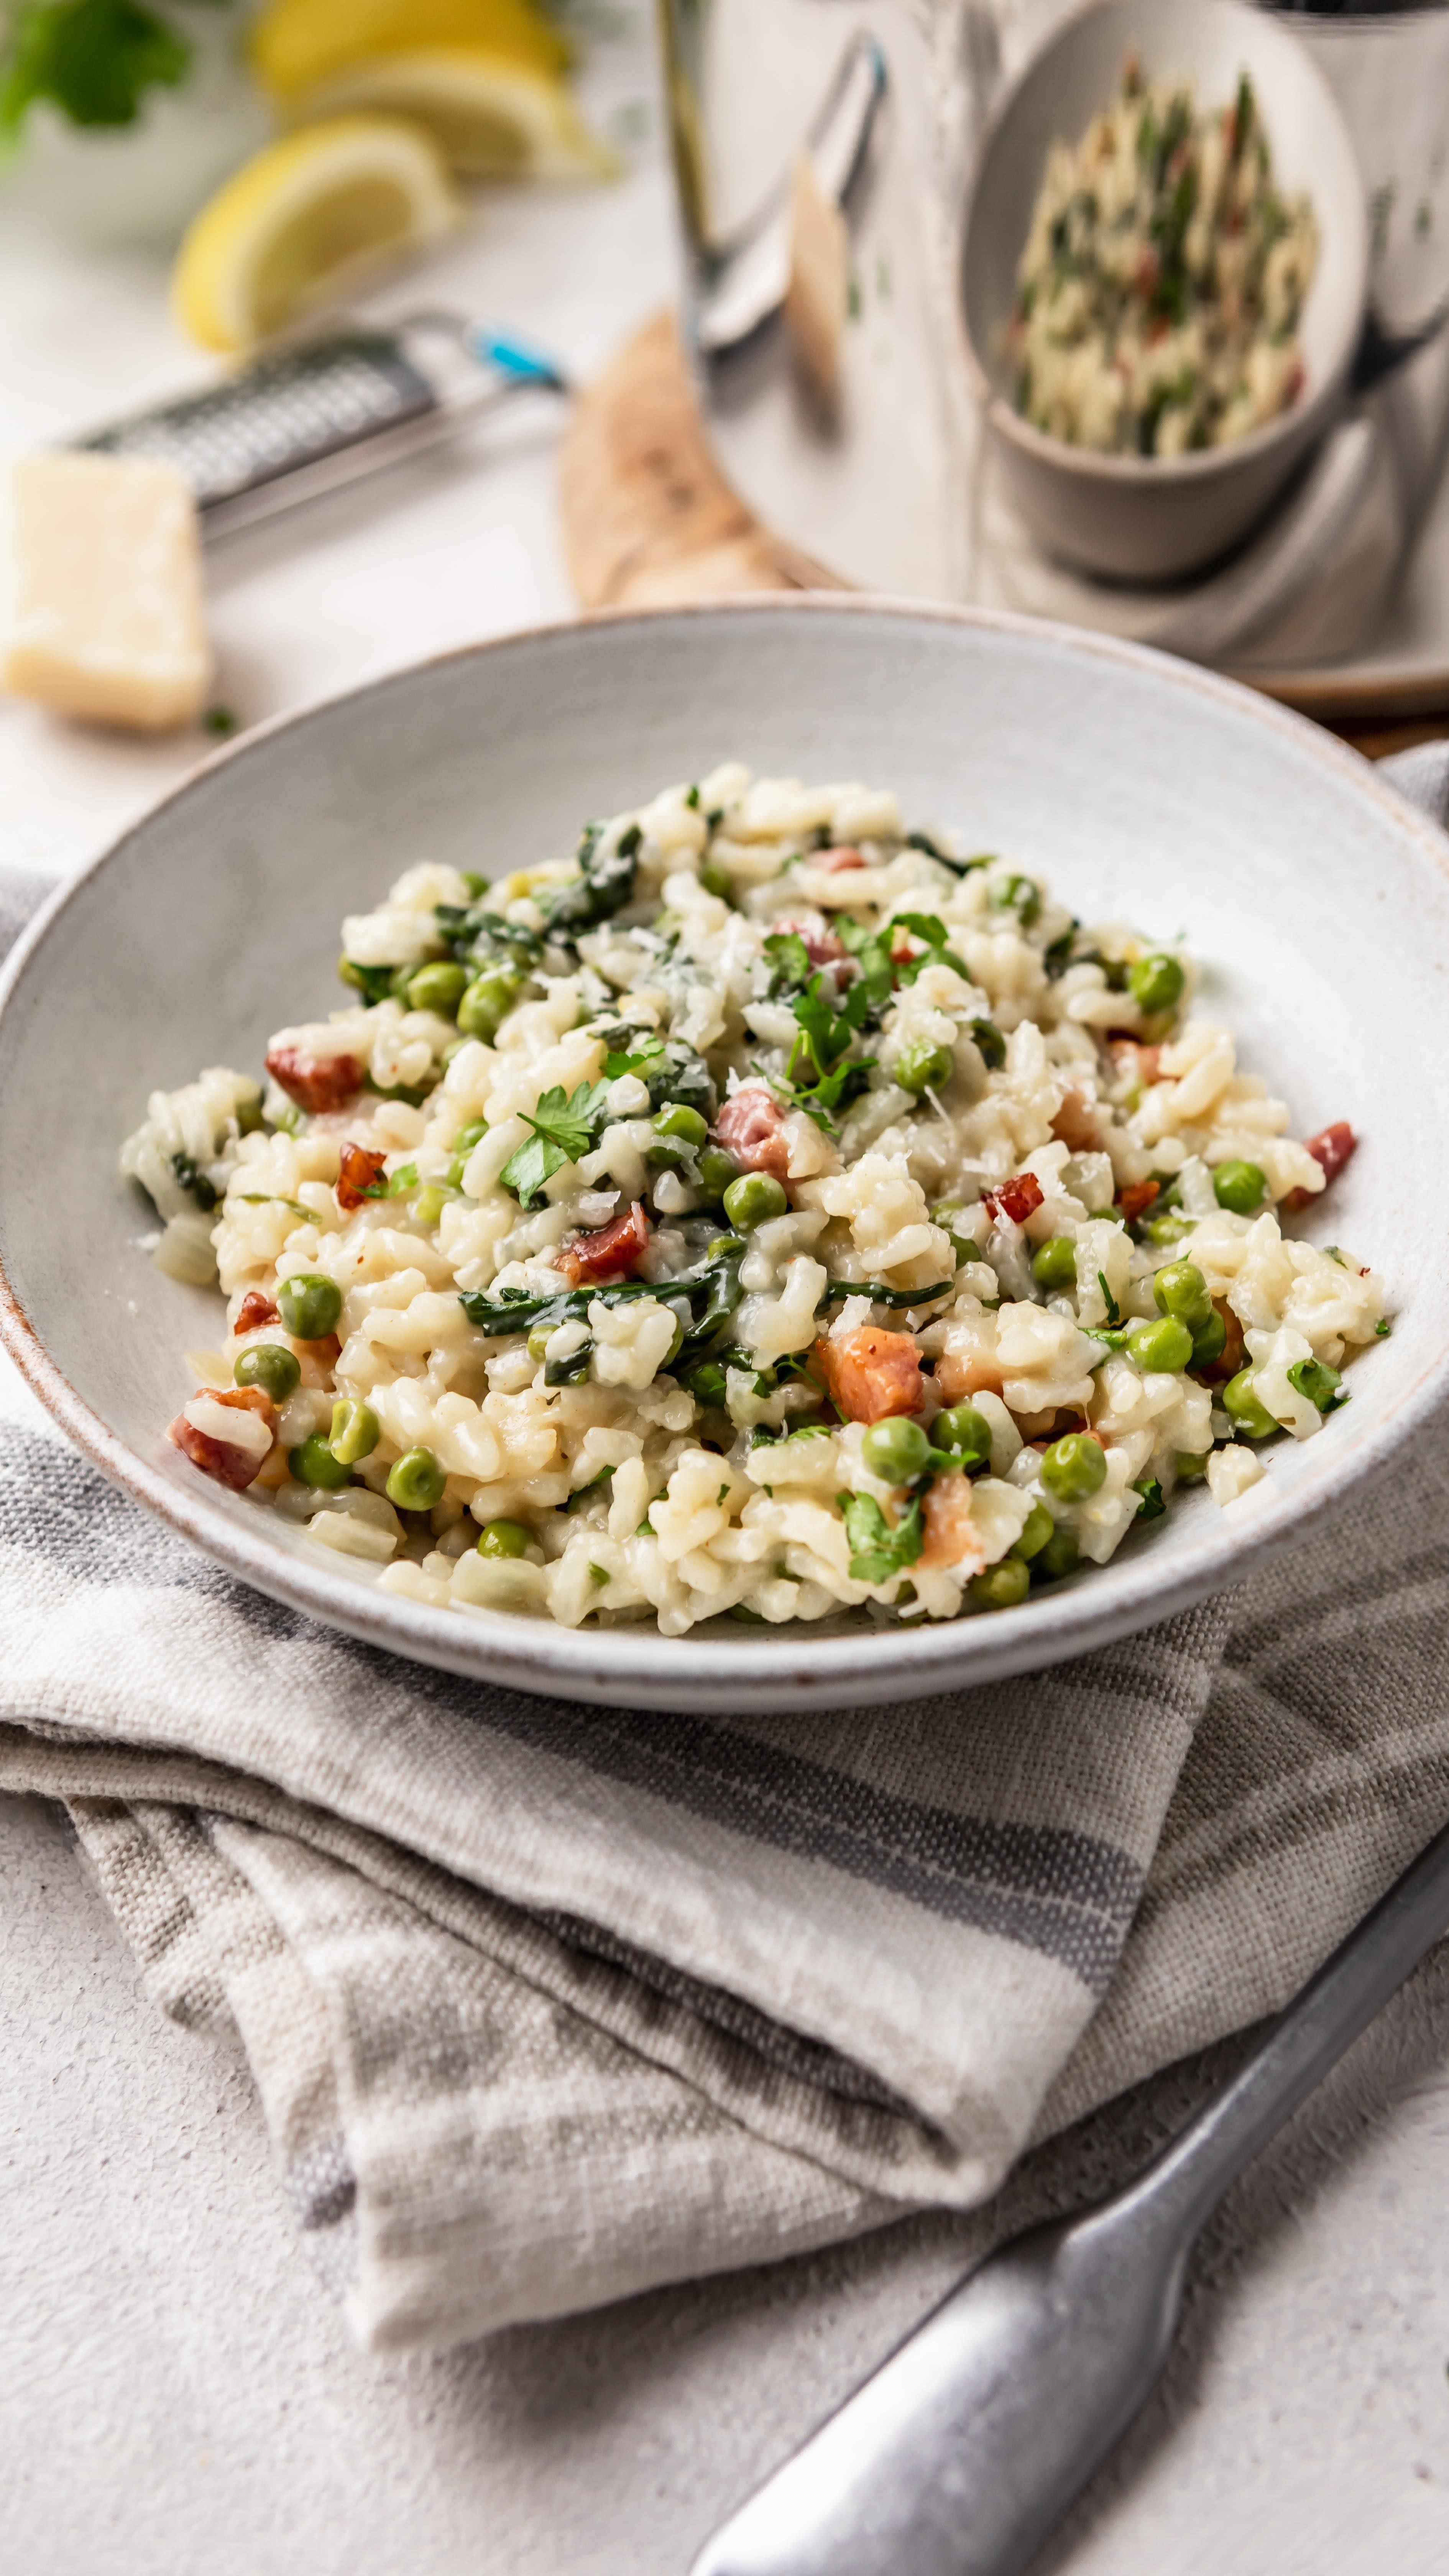 CREAMY PANCETTA AND SPRING VEGETABLE RISOTTO
 
 AD I’ve teamed up with @talacooking and created this delicious ‘Creamy Pancetta and Spring Vegetable Risotto’ using their NEW ‘20cm deep lidded saucepan’. It has an added handle making it easy to carry on and off the stove as well as Litre measurings on the side for ease when cooking.
 
What I love about this seasonal risotto recipe is it’s creaminess balanced with the crispy salty pancetta. It really is decadent but uses simple ingredients!
 
Don’t forget to hit SAVE to give this a try! And follow @talacooking for more recipes and cooking ideas!
 
SERVES 4-5
 
INGREDIENTS
 
1 tbsp olive oil
200g smoked pancetta
1 large onion, diced
3 garlic cloves, minced
350g risotto rice
1.5 litres hot chicken stock, made with 2 stock cubes
1/2 lemon, juiced
300g frozen peas
100g baby leaf spinach
100g Parmesan, grated
Black Pepper, to serve
 
METHOD
 
1. Add the olive oil to large saucepan. Fry the pancetta until crispy, then remove, leaving the oil in the pan and set aside.
2. Add the diced onion, and fry until softened (around 8 minutes) then add the minced garlic and fry for a further 2 minutes.
3. Add the rice and allow the oil to coat it. Stir for 1 minute before adding in the hot stock ladle by ladle, allowing the rice to absorb the stock after each addition. This will take around 25-30 minutes.
4. Keep adding the stock and stirring gently until the risotto is creamy in appearance and the rice is al dente. You may not need to add all the stock.
5. When adding the last ladle of stock, add the frozen peas and cook for a final 5 minutes until the rice and peas are cooked.
6. Grate in two-thirds of the Parmesan, add the spinach and crispy pancetta, stir through until spinach has wilted.
7. Serve in pasta bowls and garnish some cracked black pepper and the rest of the Parmesan.
.
.
#recipereels #dinnerrecipes #risotto #risottorecipe #foodreels #easydinner #trendingreels #foodie